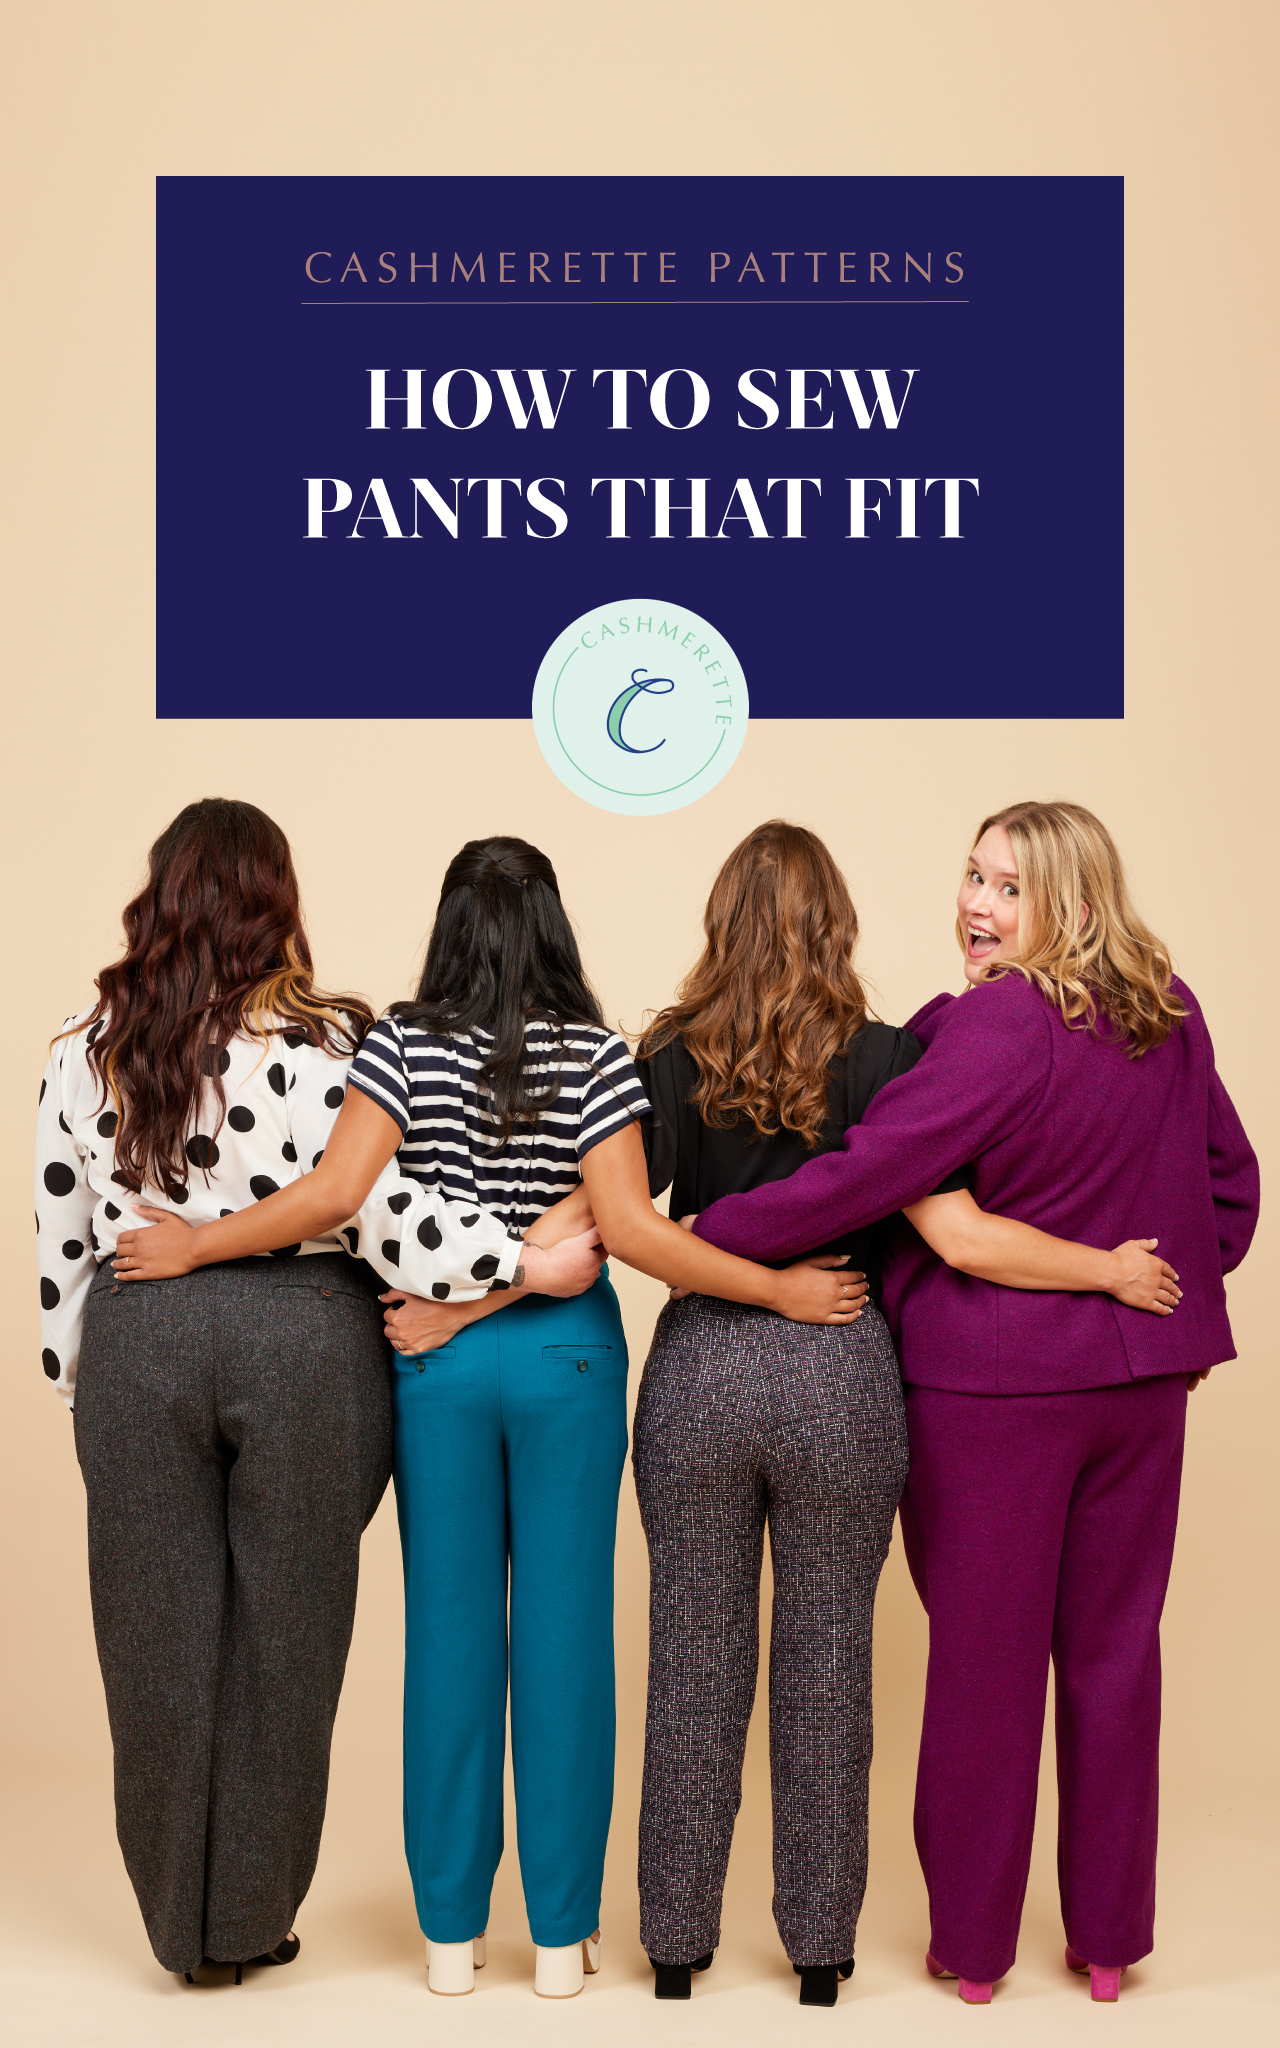 Pants Fitting Adjustments: Best Tips for Perfectly Fitting Pants!